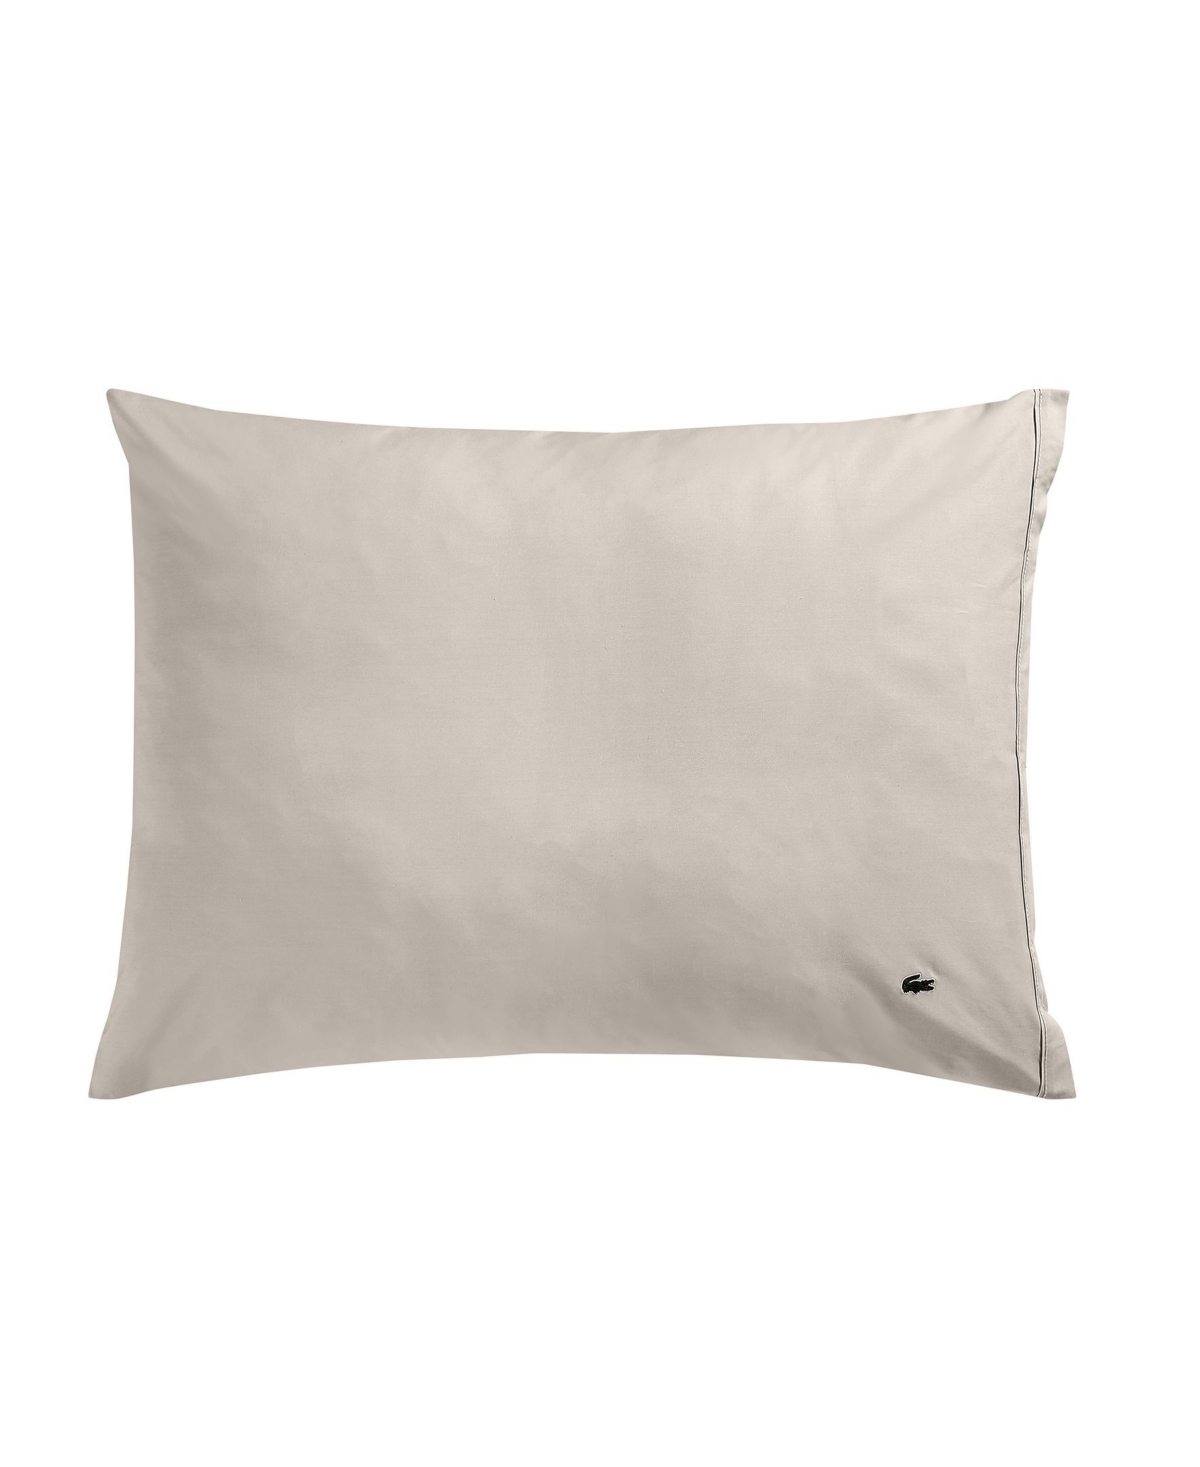 Lacoste Home Solid Cotton Percale Pillowcase Pair, King In Pumice